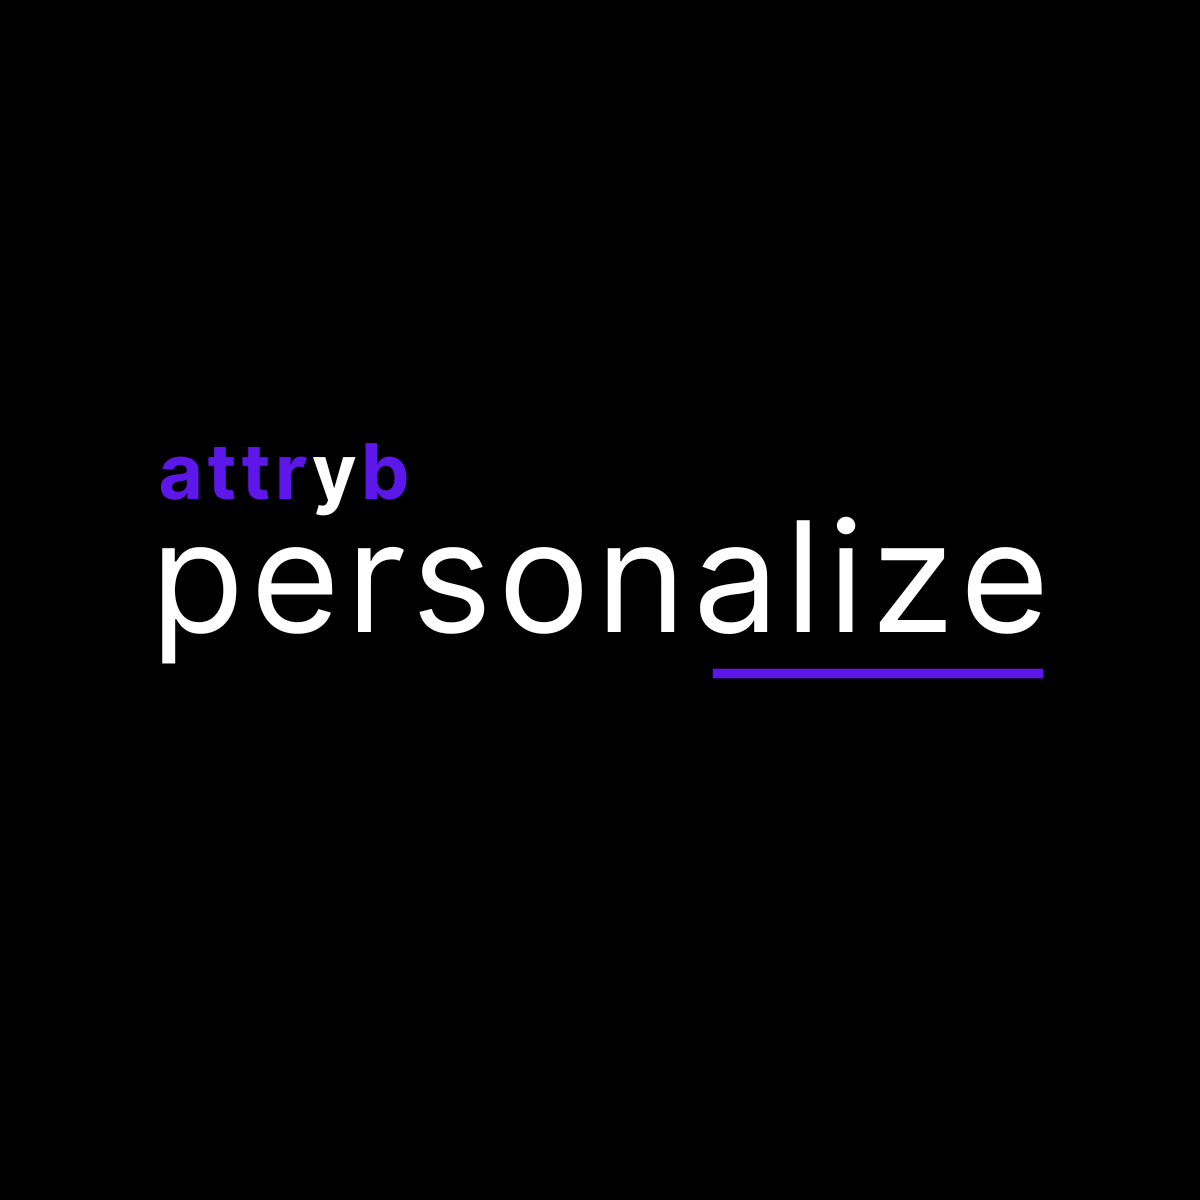 Attryb Personalize